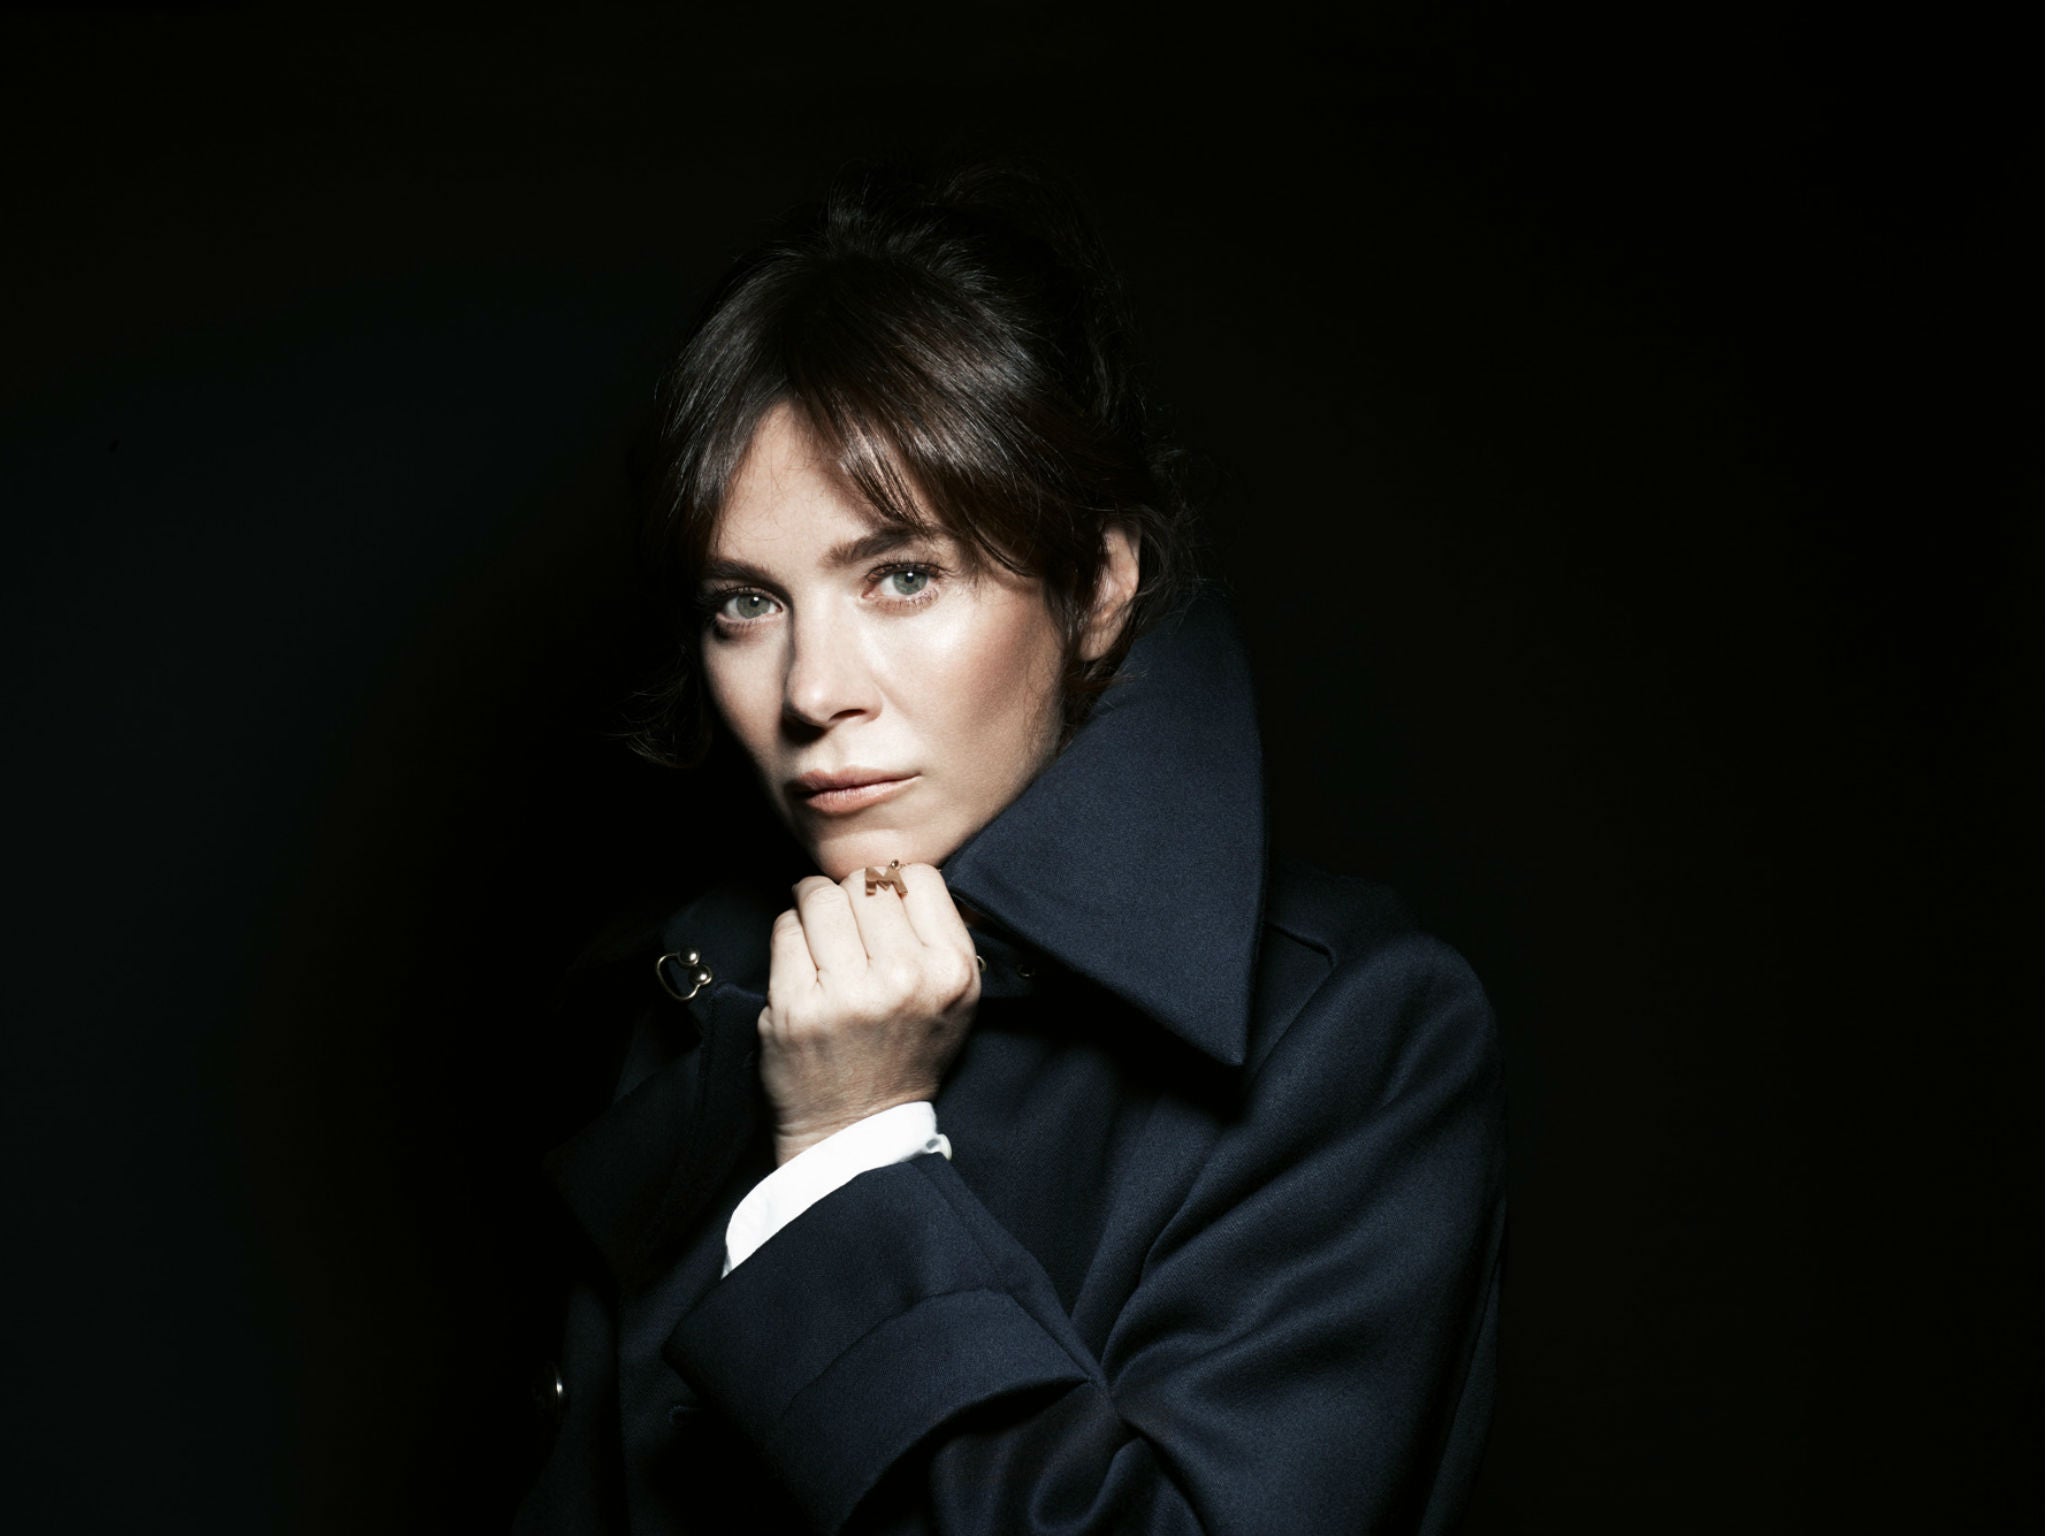 Anna Friel on Marcella, The Girlfriend Experience and breaking sexual taboos on TV The Independent The Independent